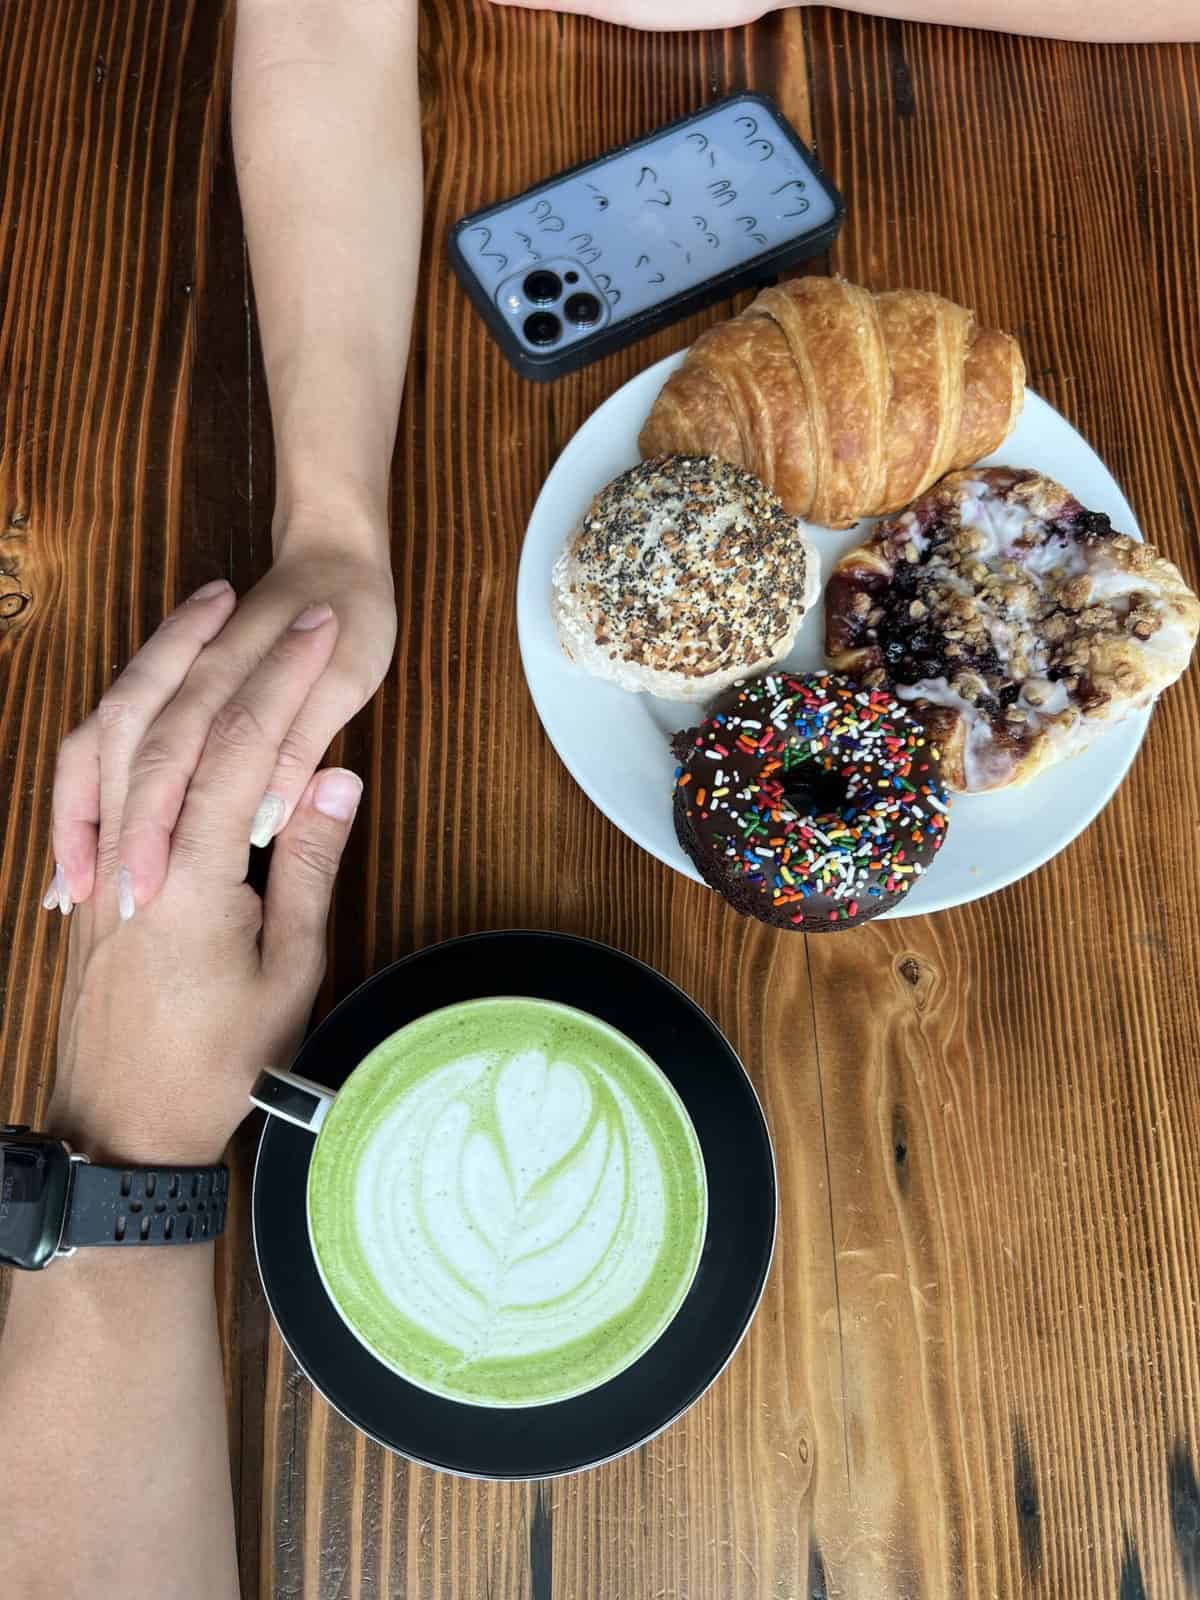 holding hands next to vegan matcha latte and pastries at Timeless Coffee in Oakland, CA